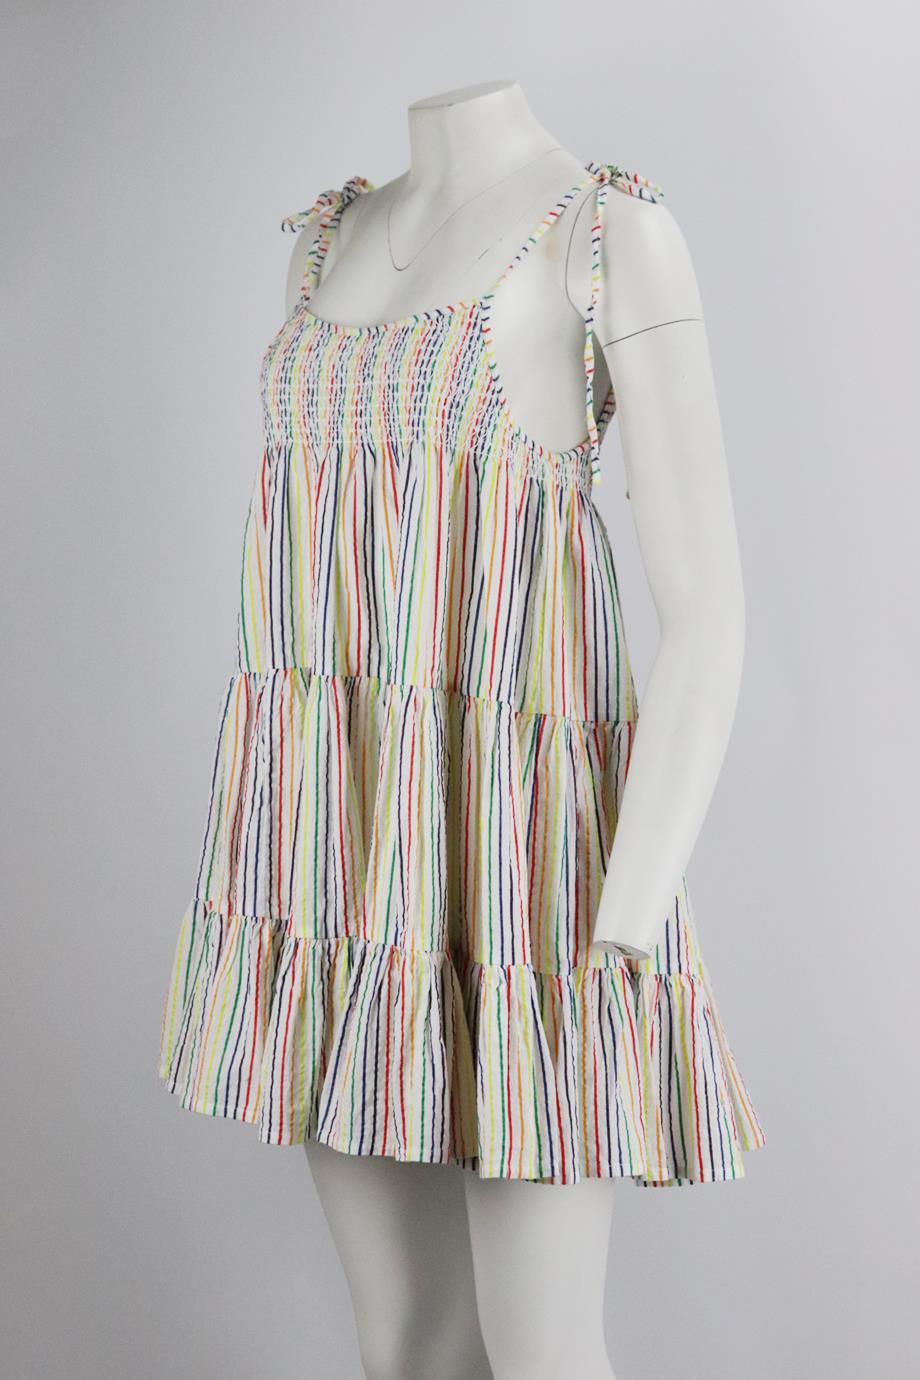 SOLID AND STRIPED TIERED STRIPED COTTON MINI DRESS SMALL